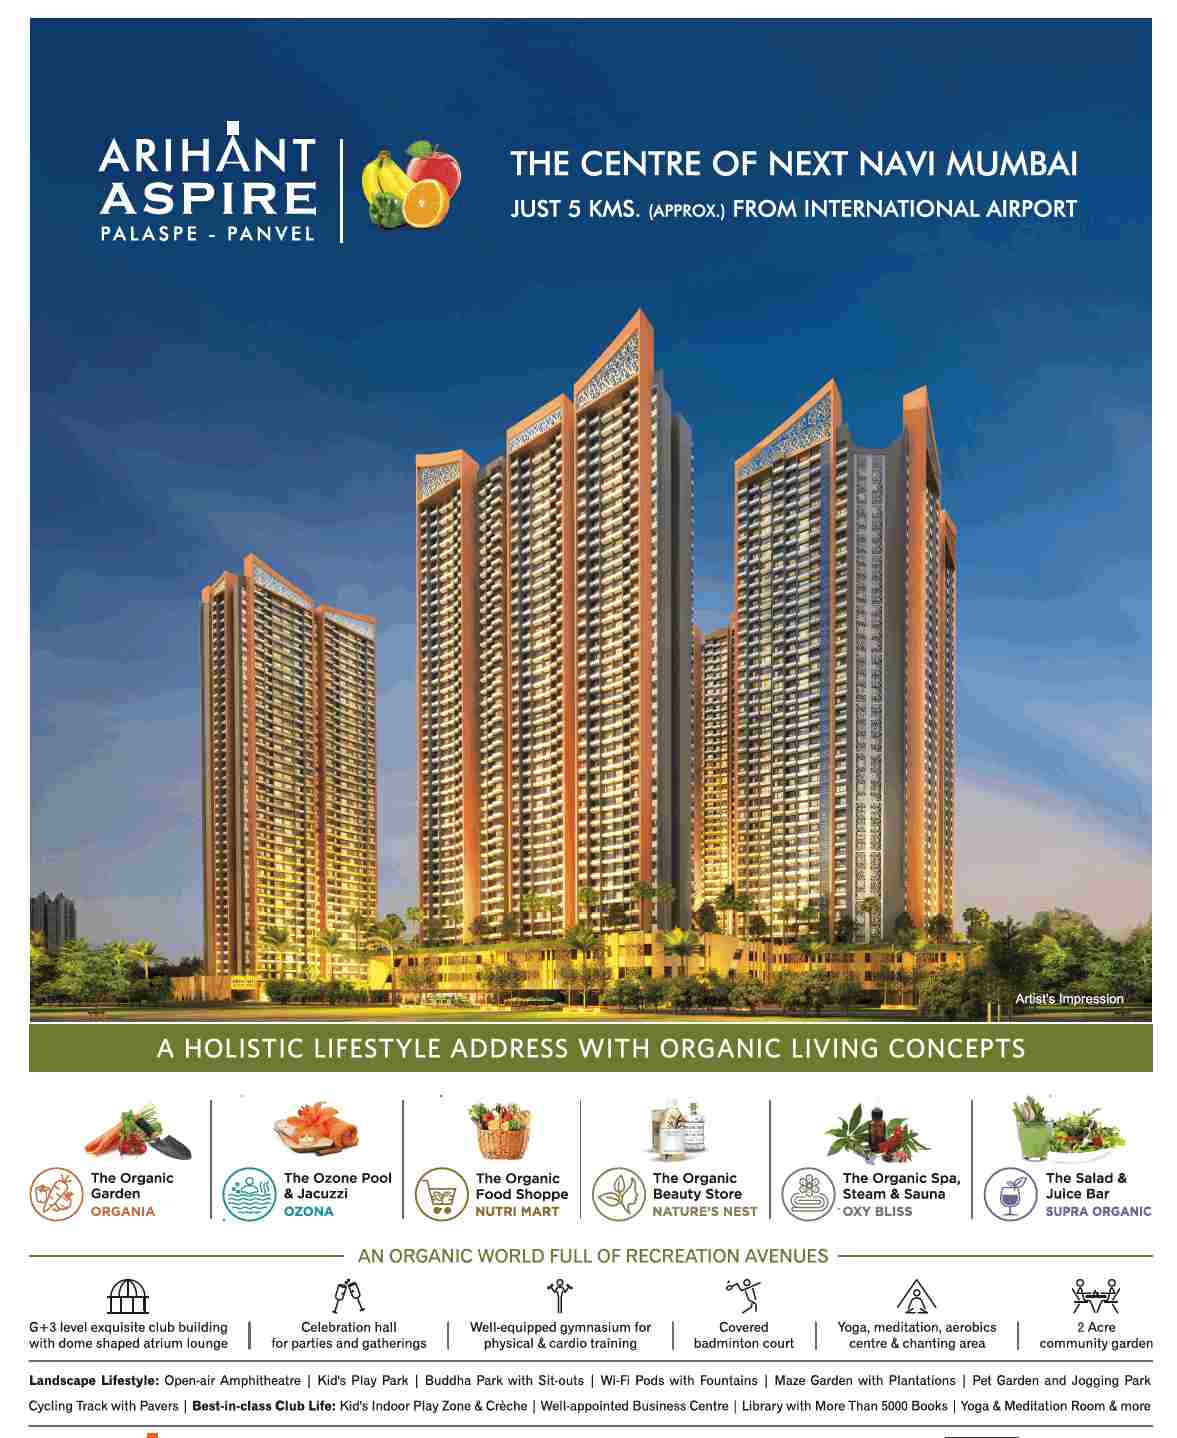 Reside in a holistic lifestyle address with organic living concepts at Arihant Aspire in Navi Mumbai